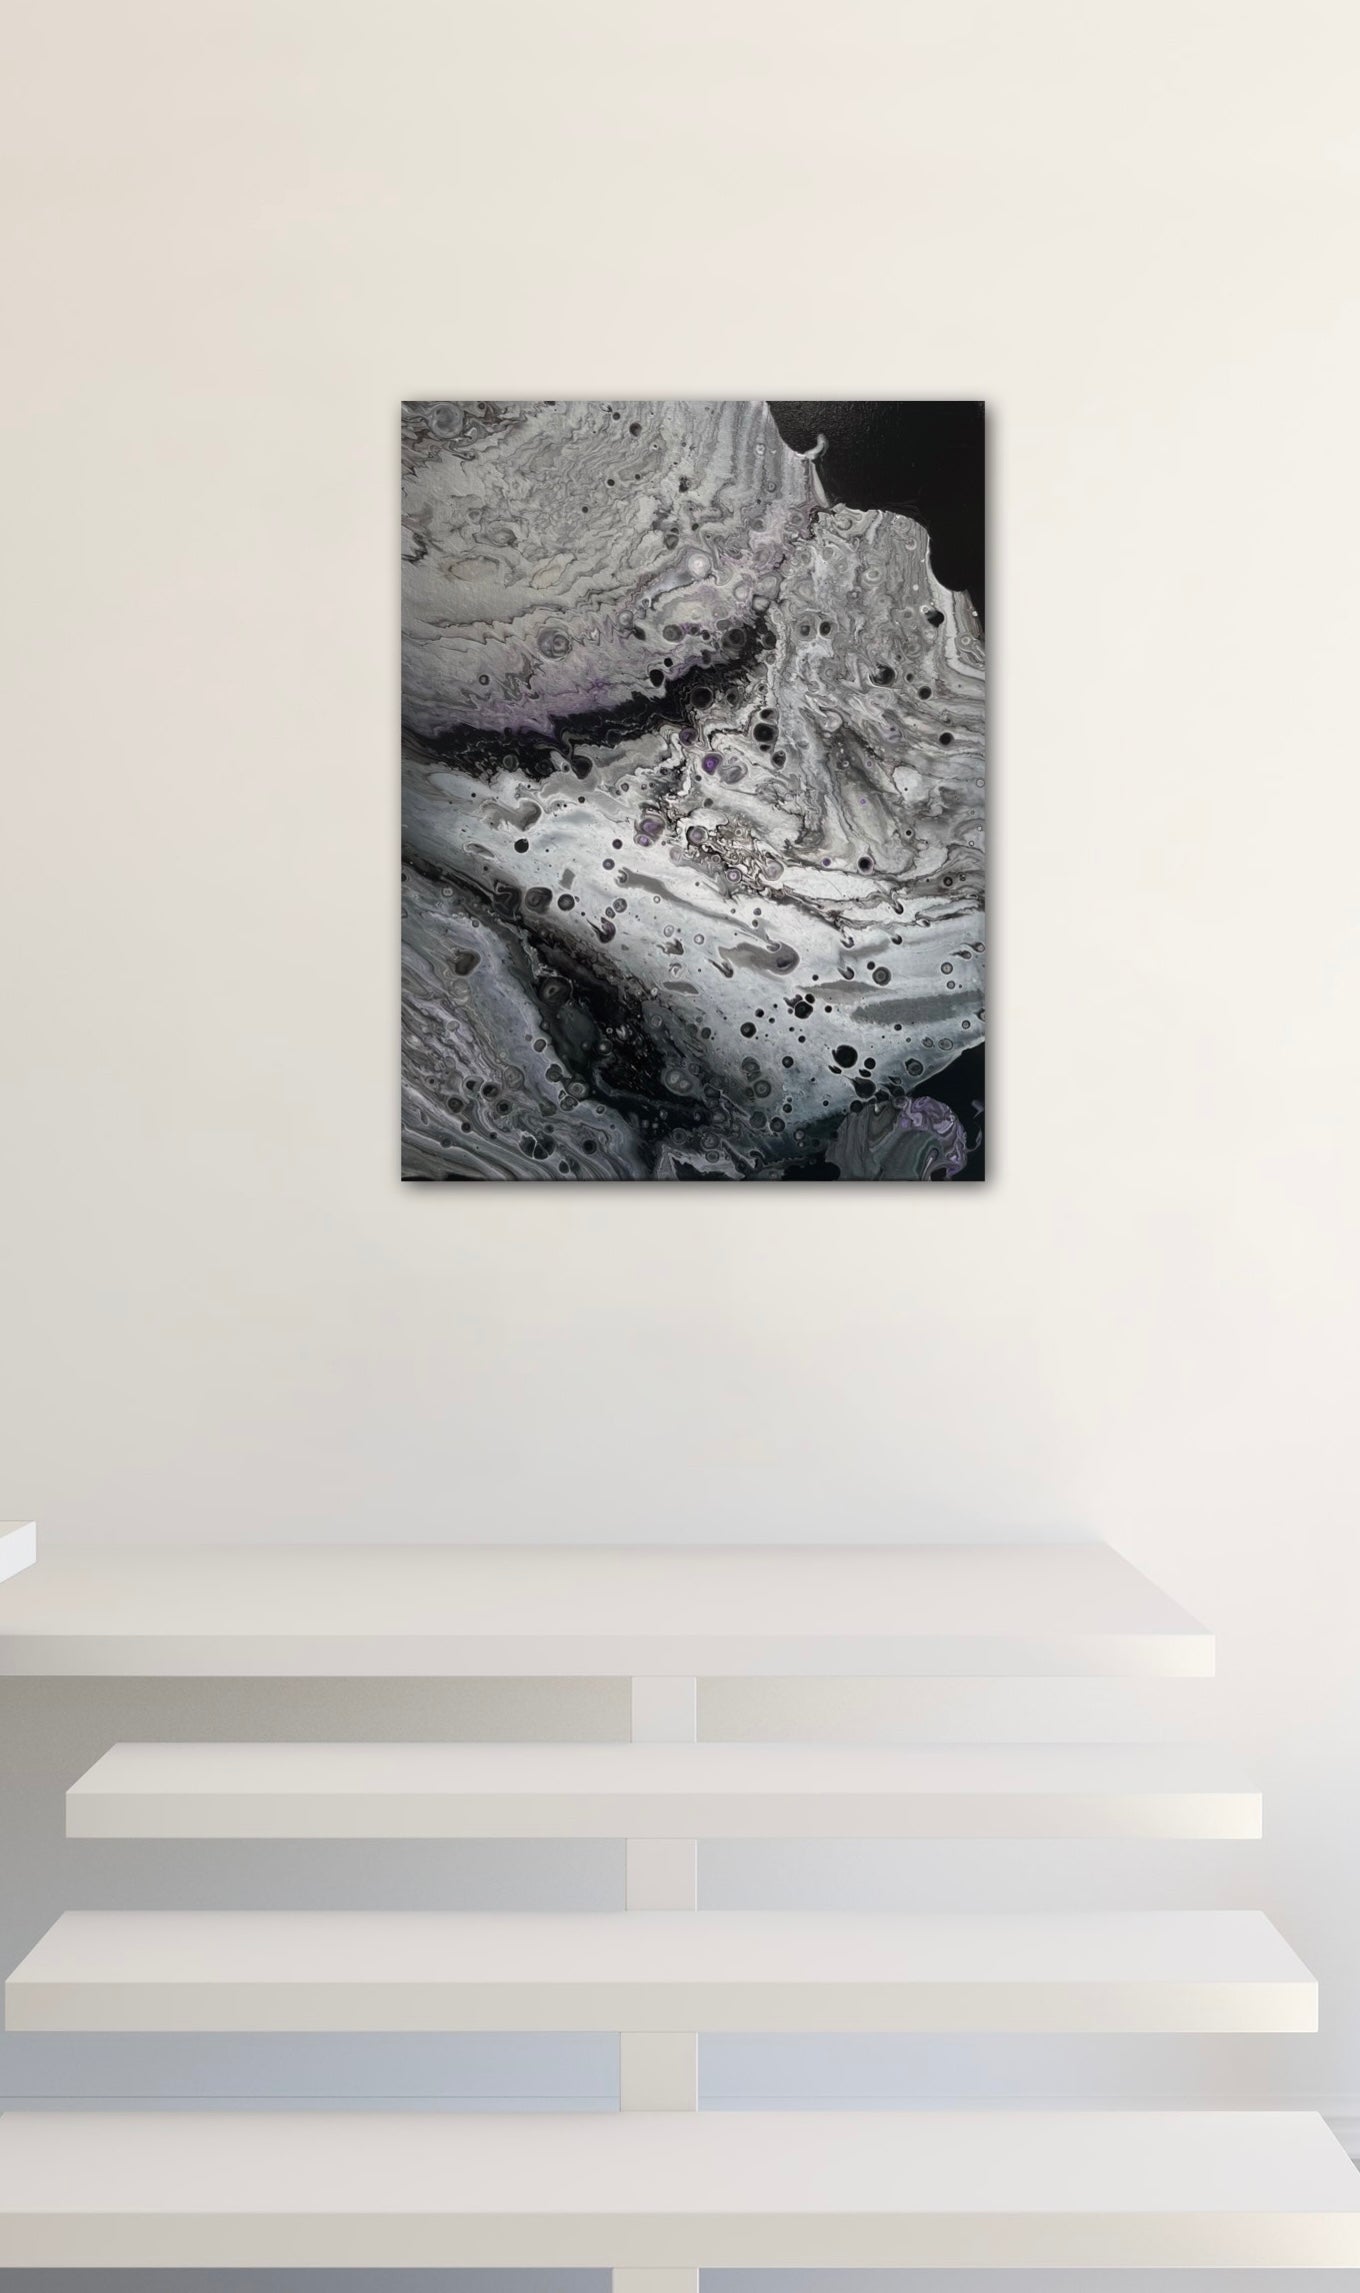 abstract moonscape painting on dsplay, several size options available. Abstract fluid artwork resembling a lunar surface.